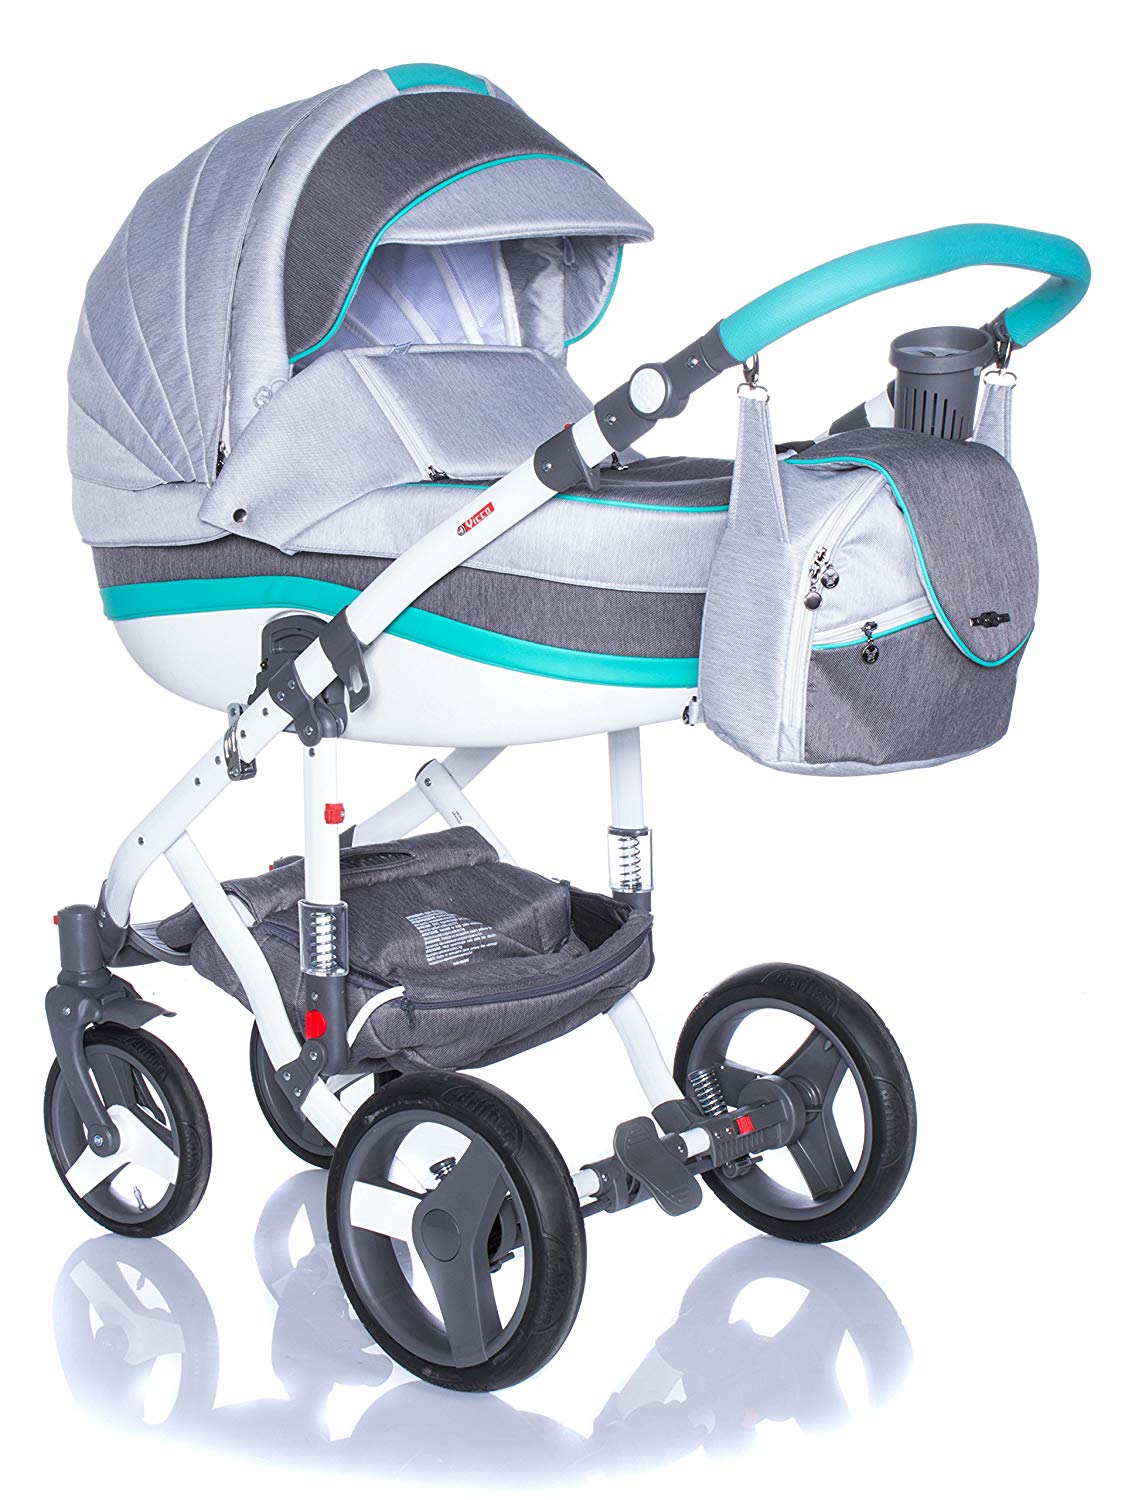 Combi Pushchair Travel System Adamex Vicco R9 Turquoise Blue 3 in 1 Sports Pushchair/Car Seat Kite 0-13KG